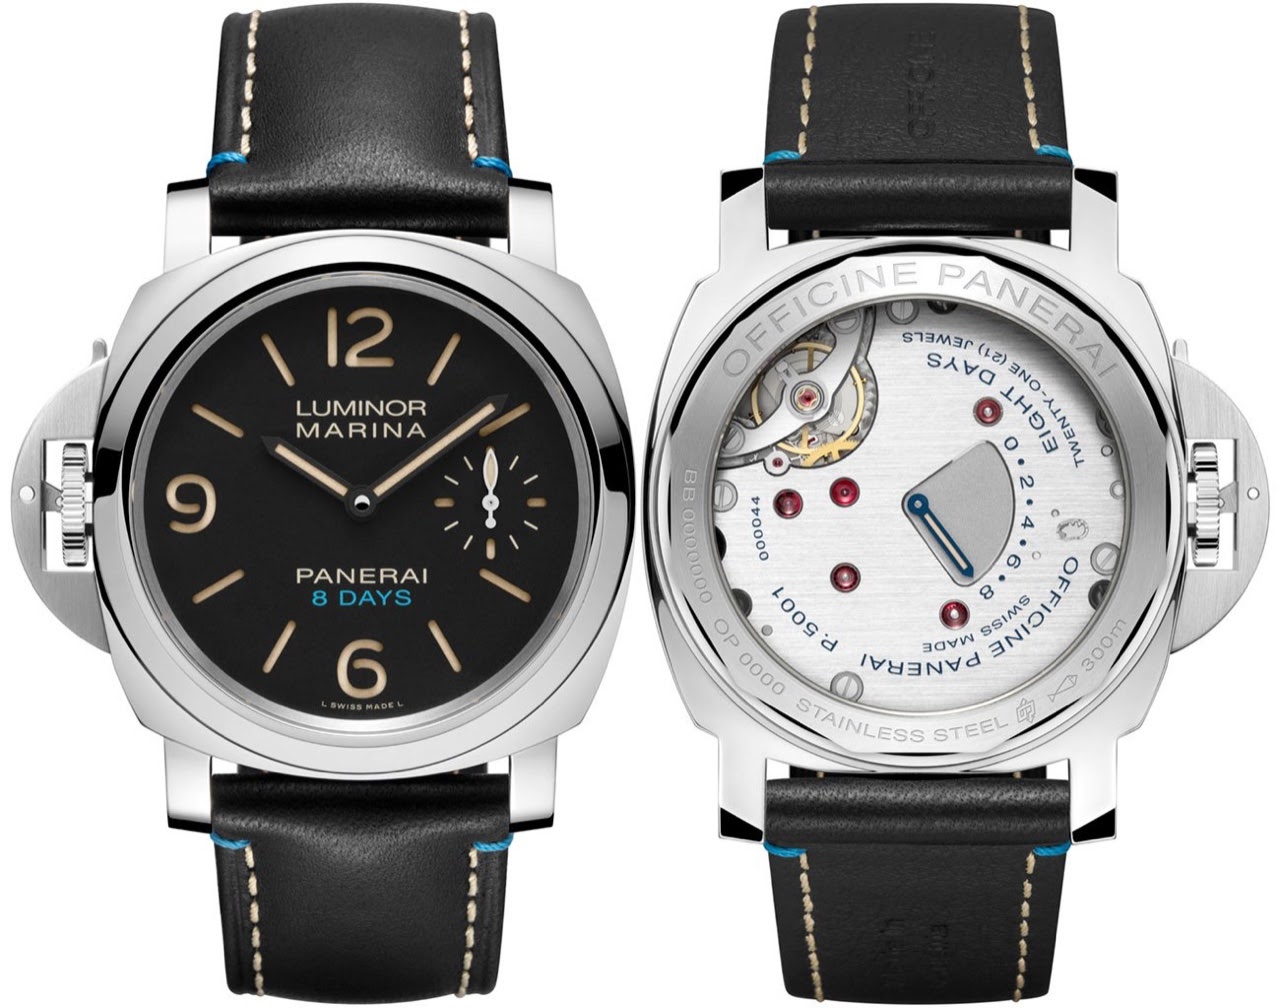 Officine Panerai - Any thoughts on the Pam 796?